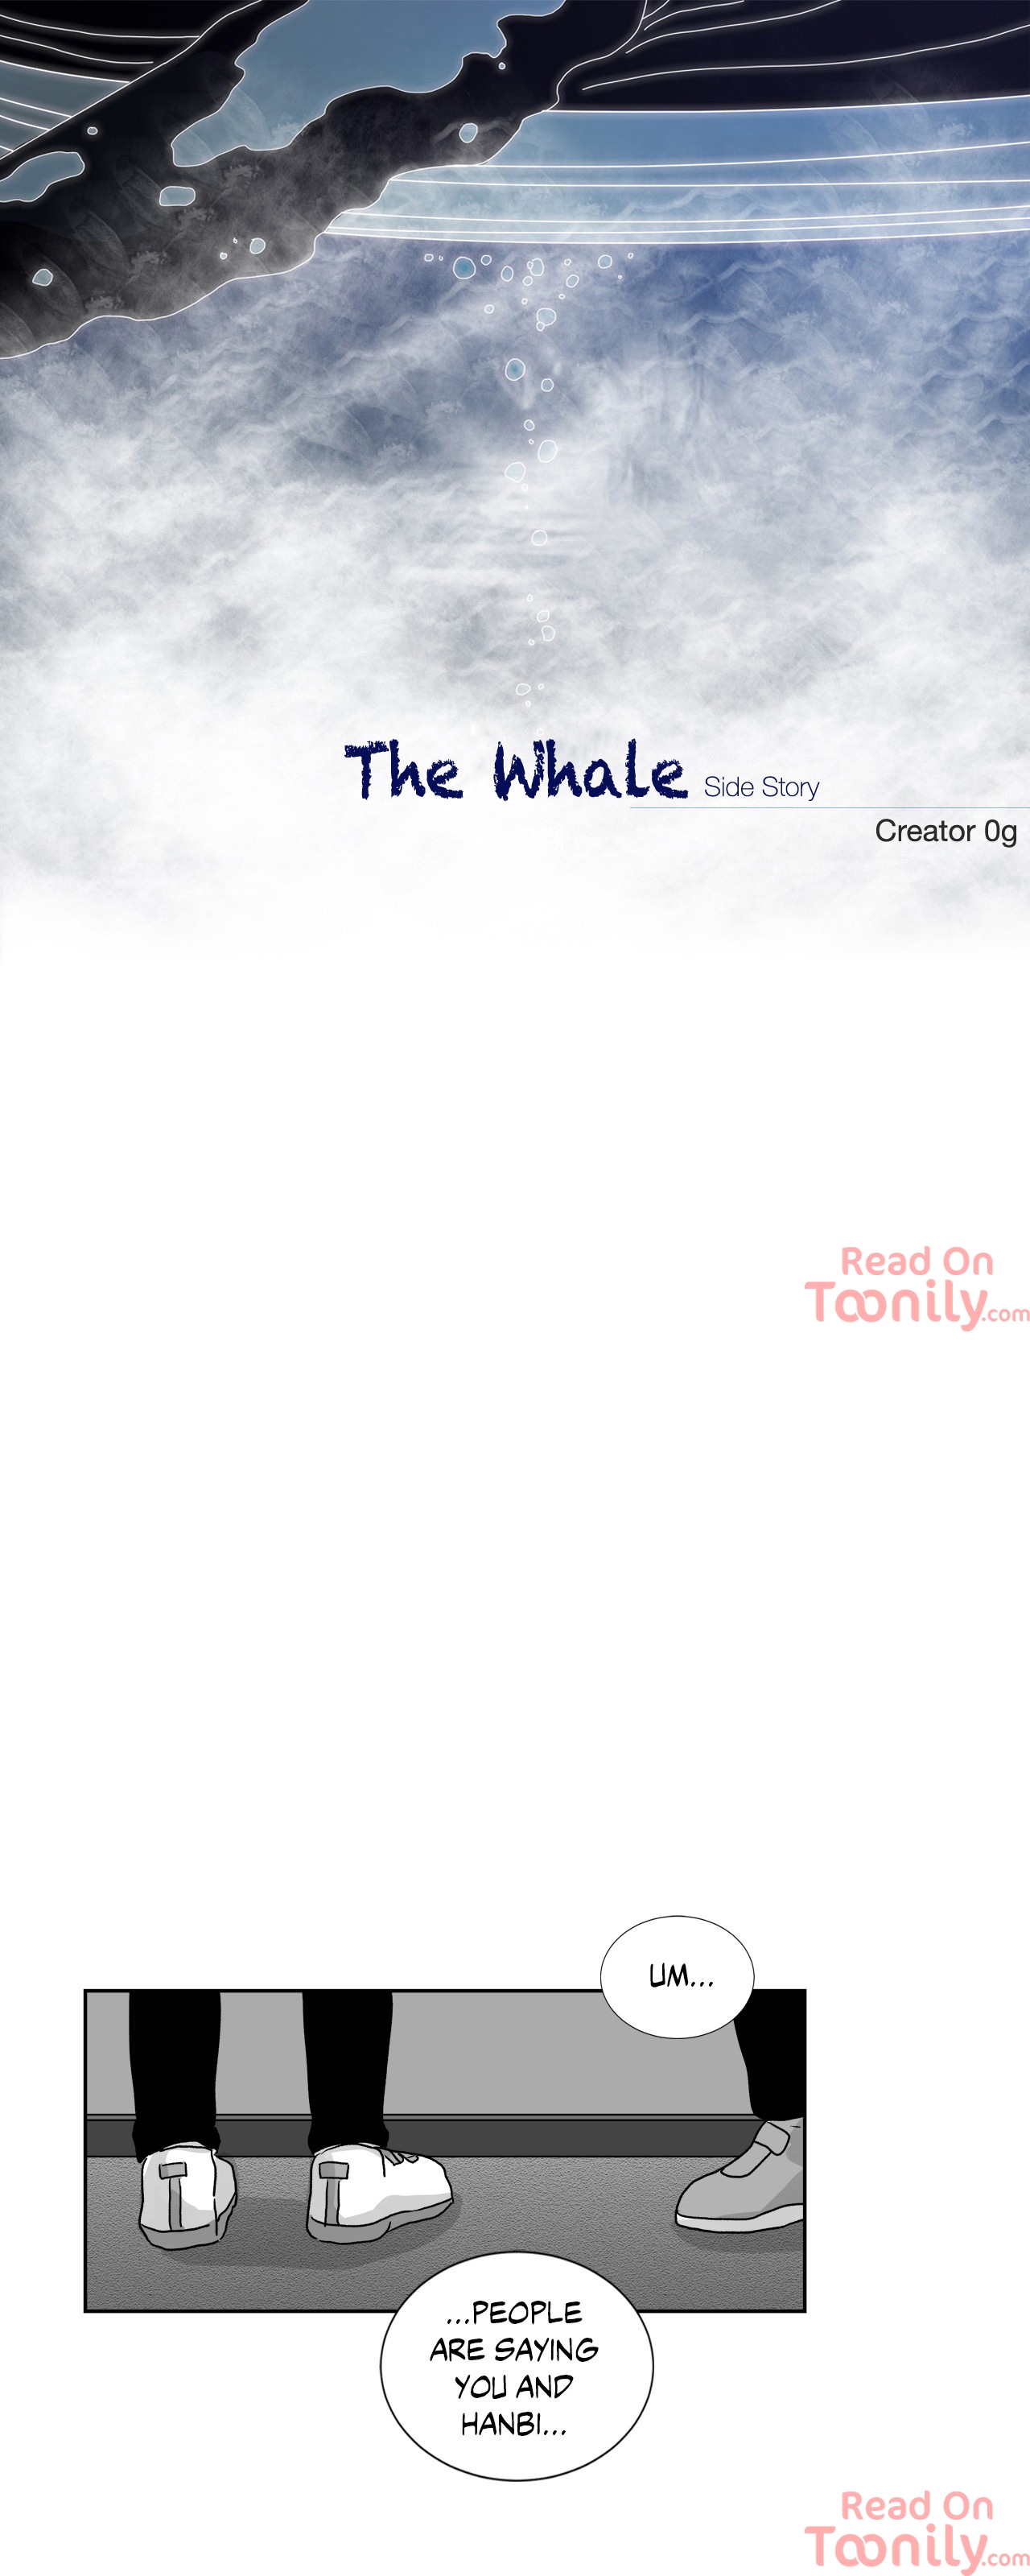 The Whale image